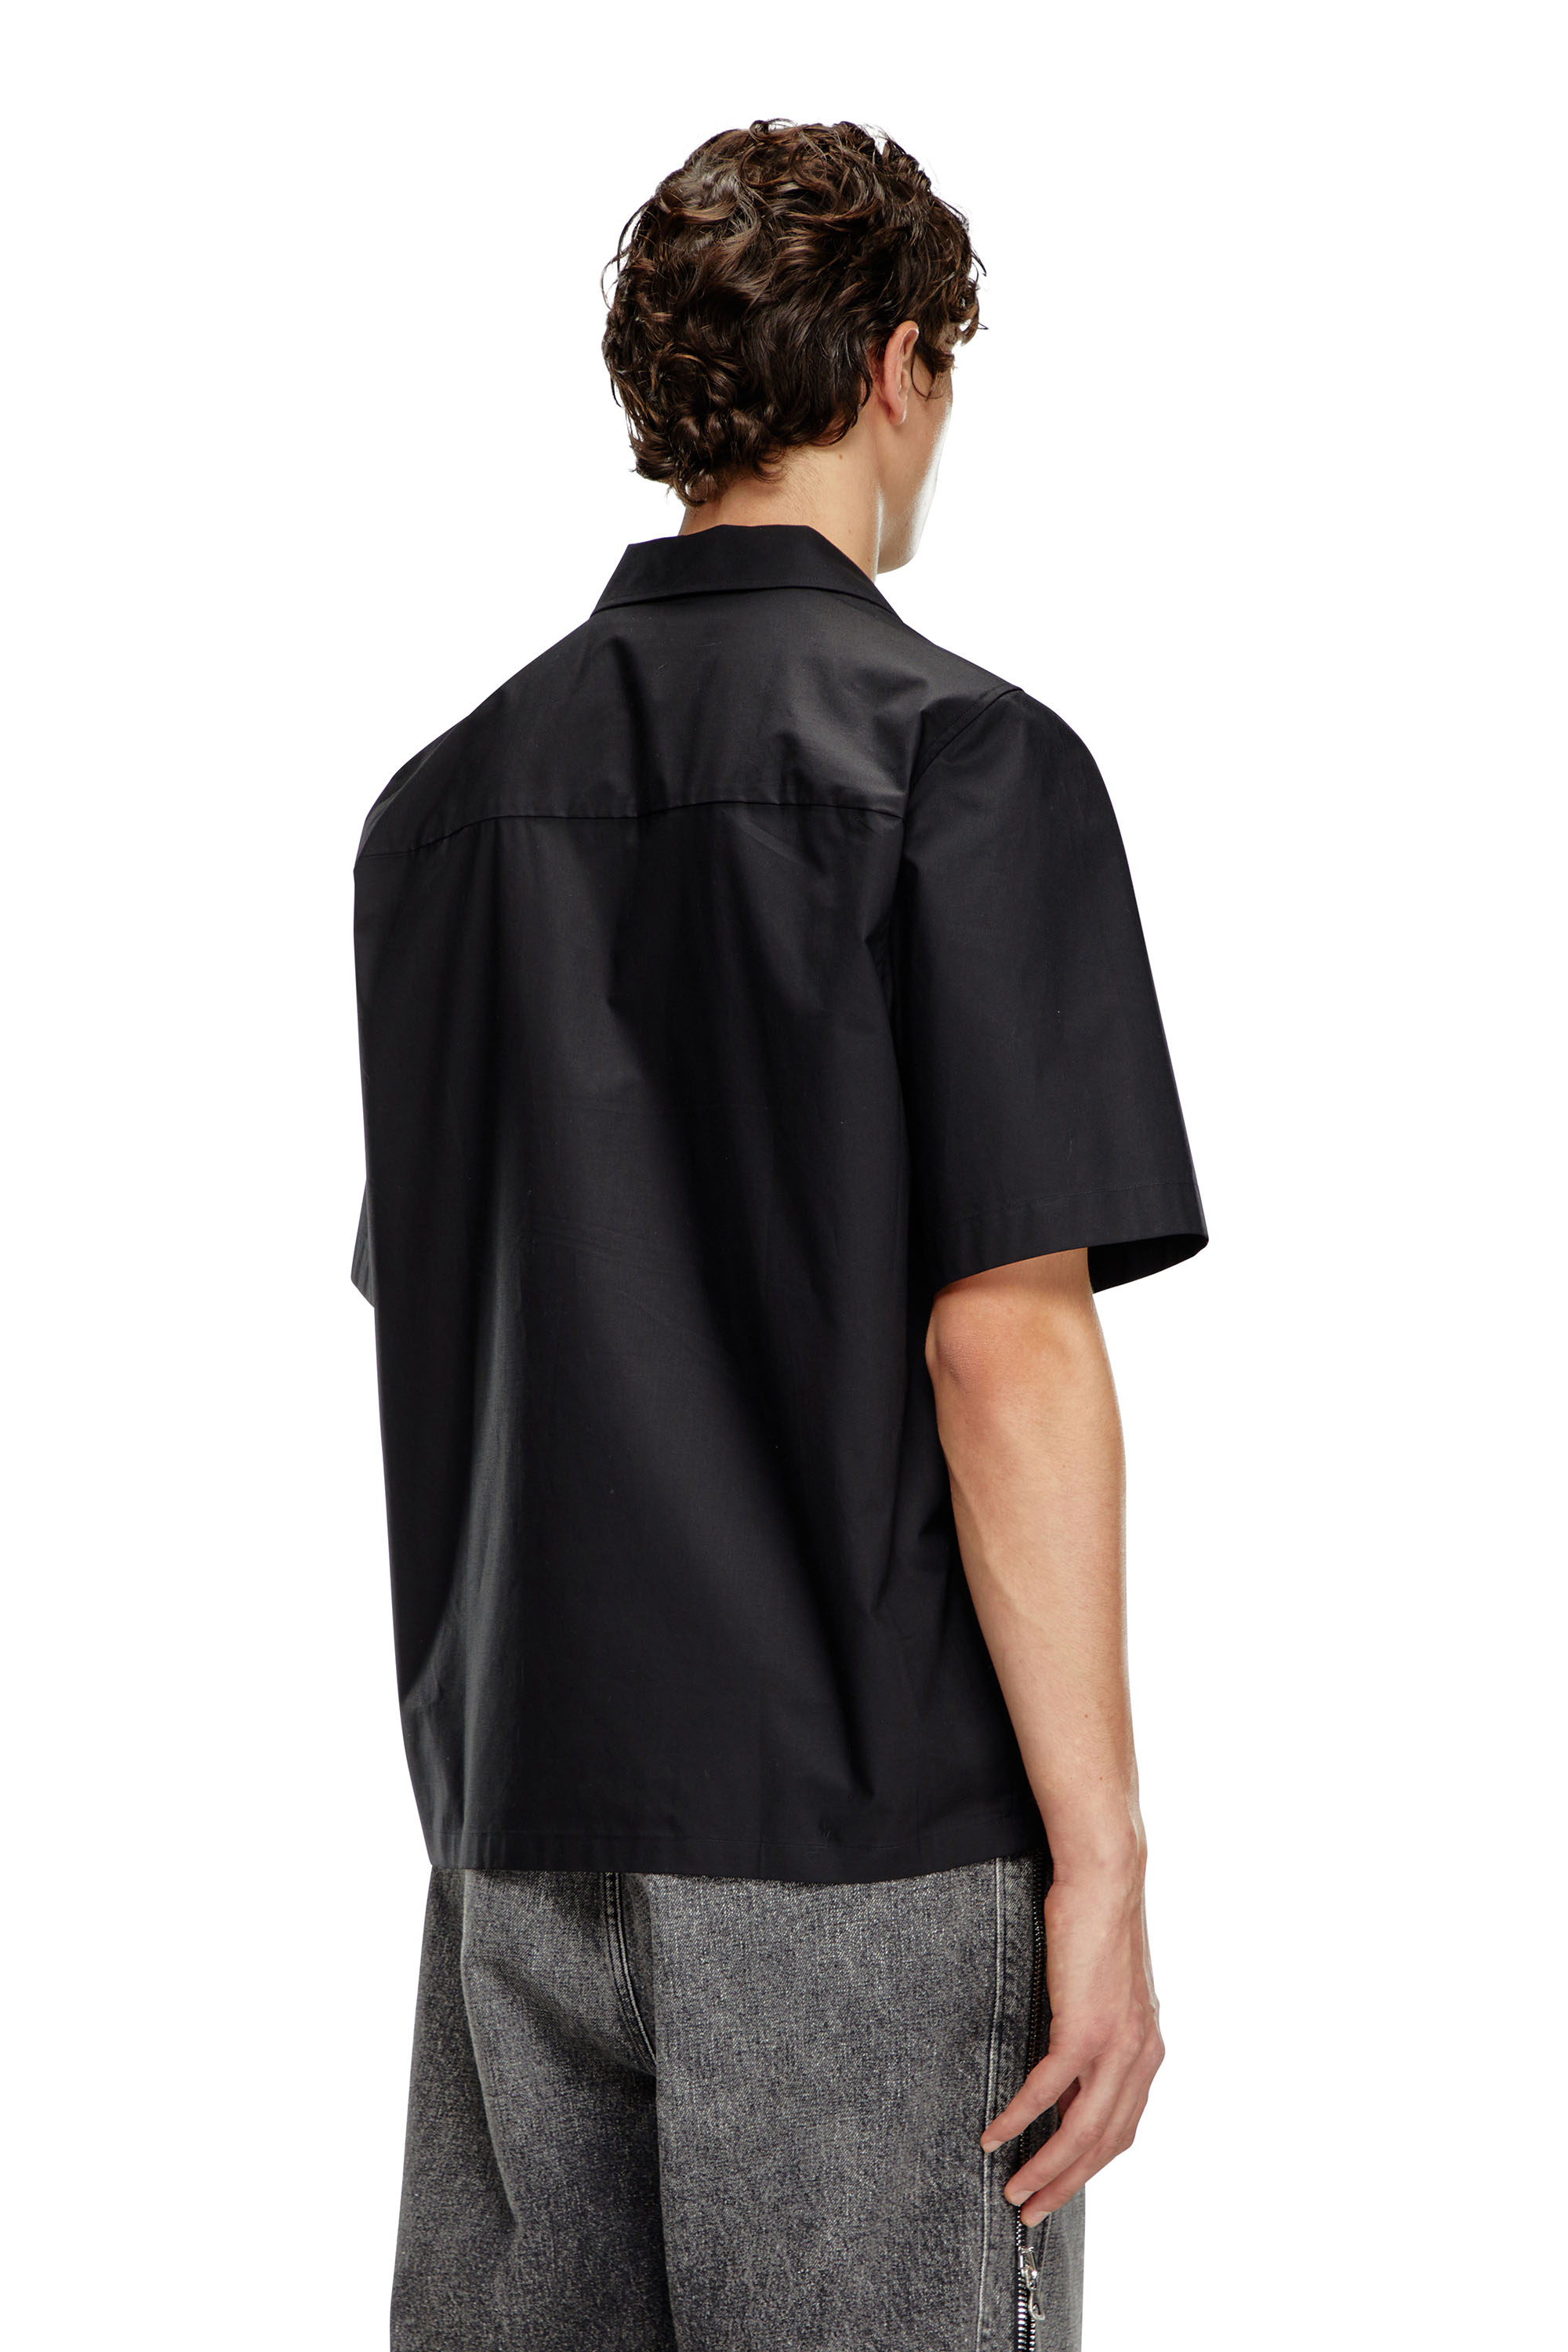 Diesel - S-MAC-C, Man Bowling shirt with logo embroidery in Black - Image 2